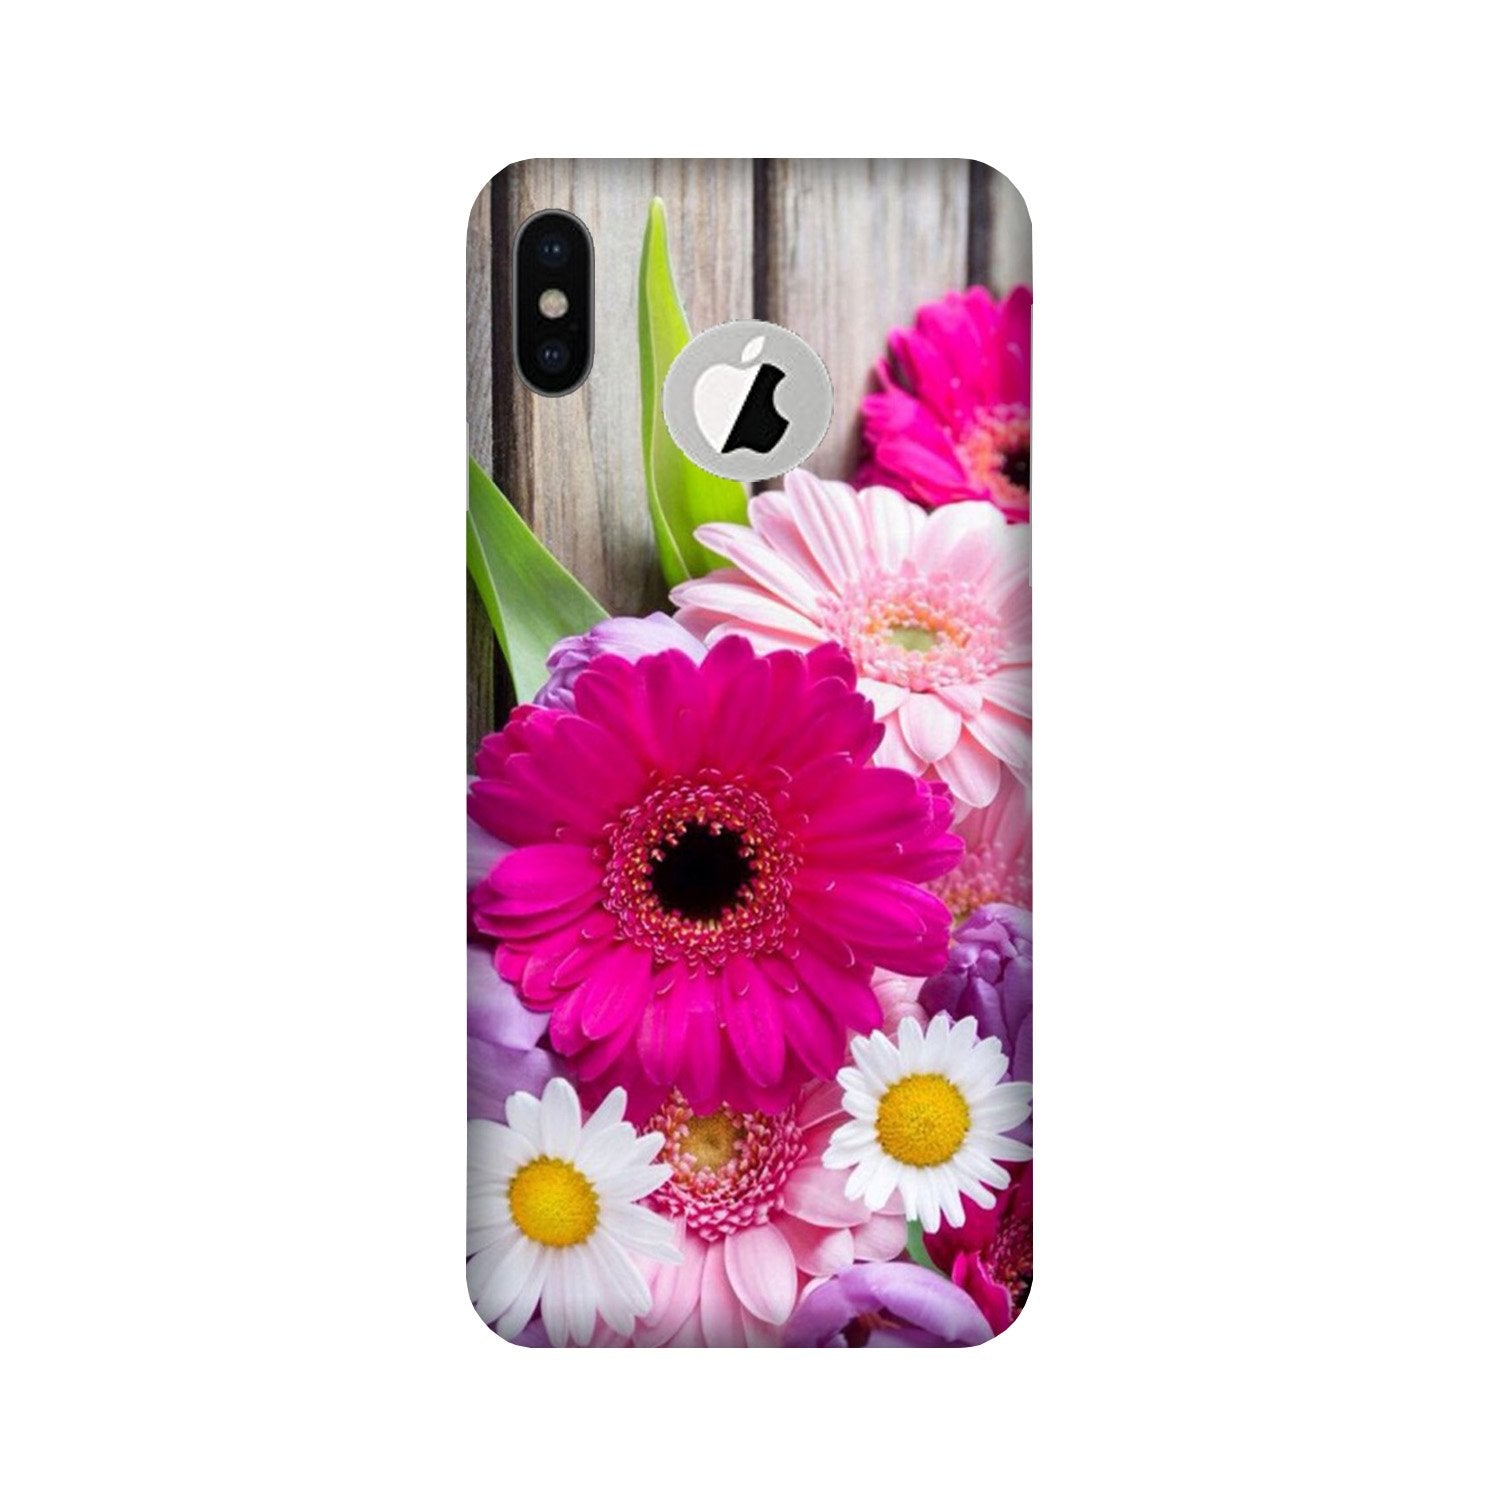 Coloful Daisy2 Case for iPhone Xs logo cut 